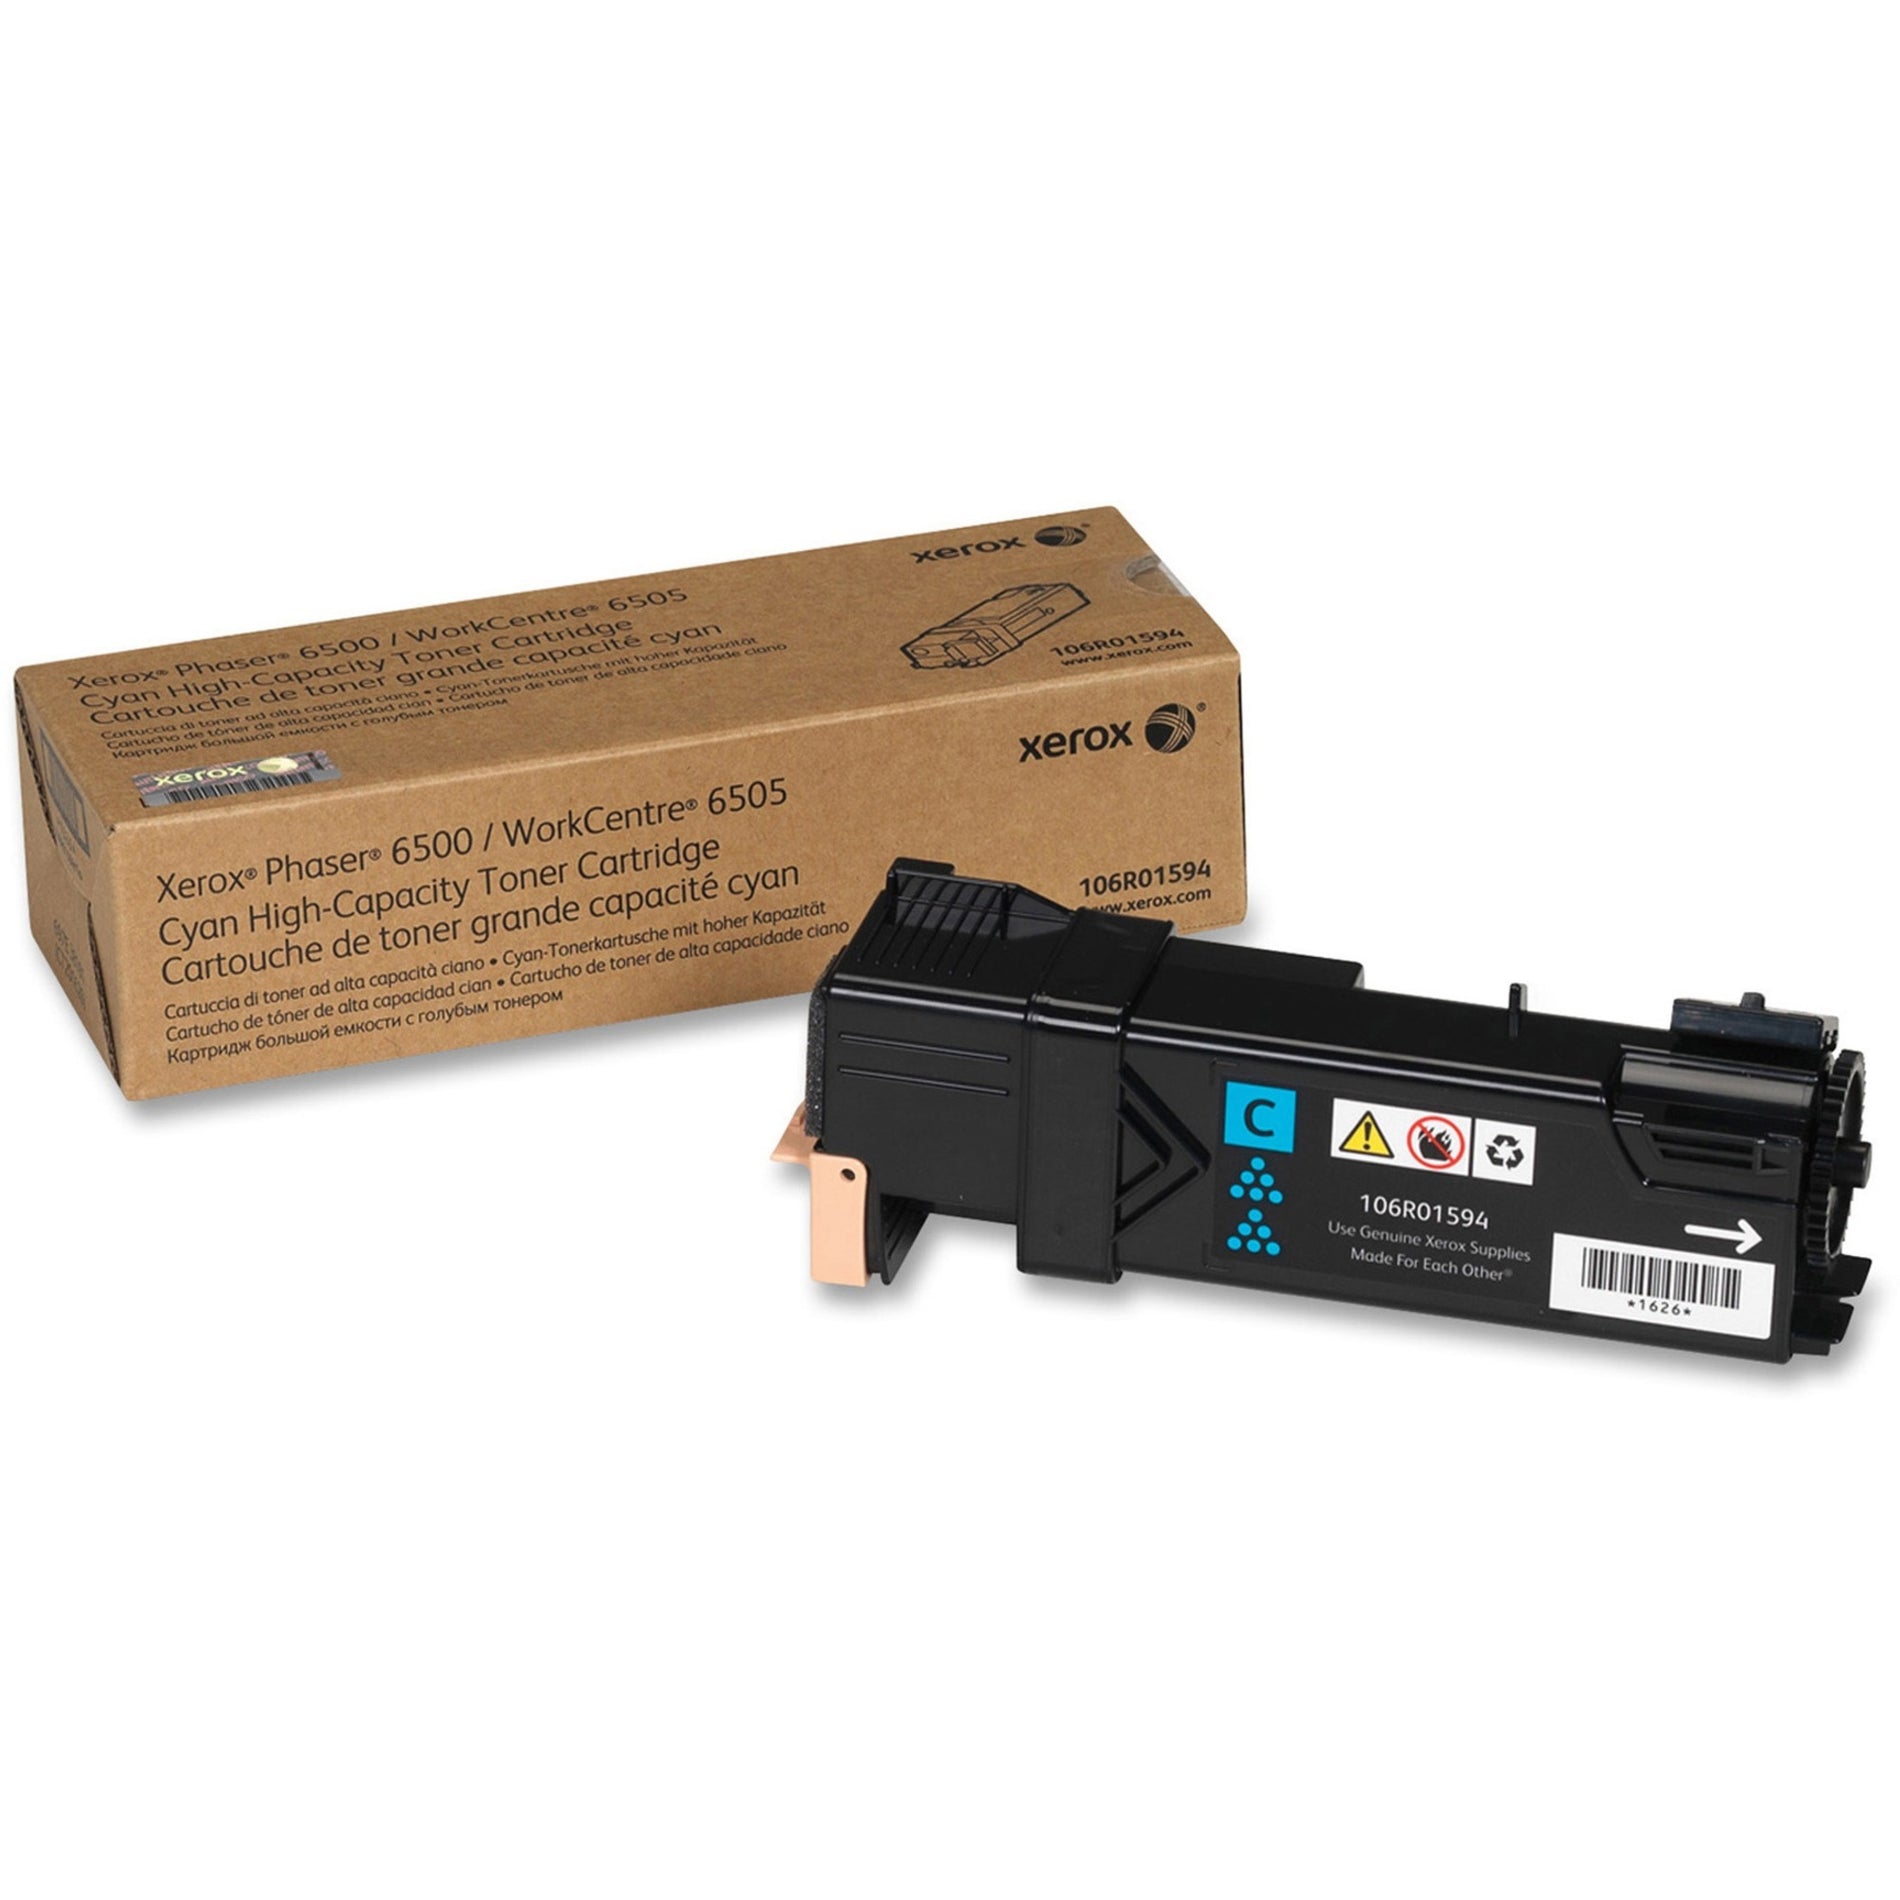 Xerox 106R01594 Phaser 6500/WC 6505 High Capacity Toner Cartridge, Cyan, 2500 Pages